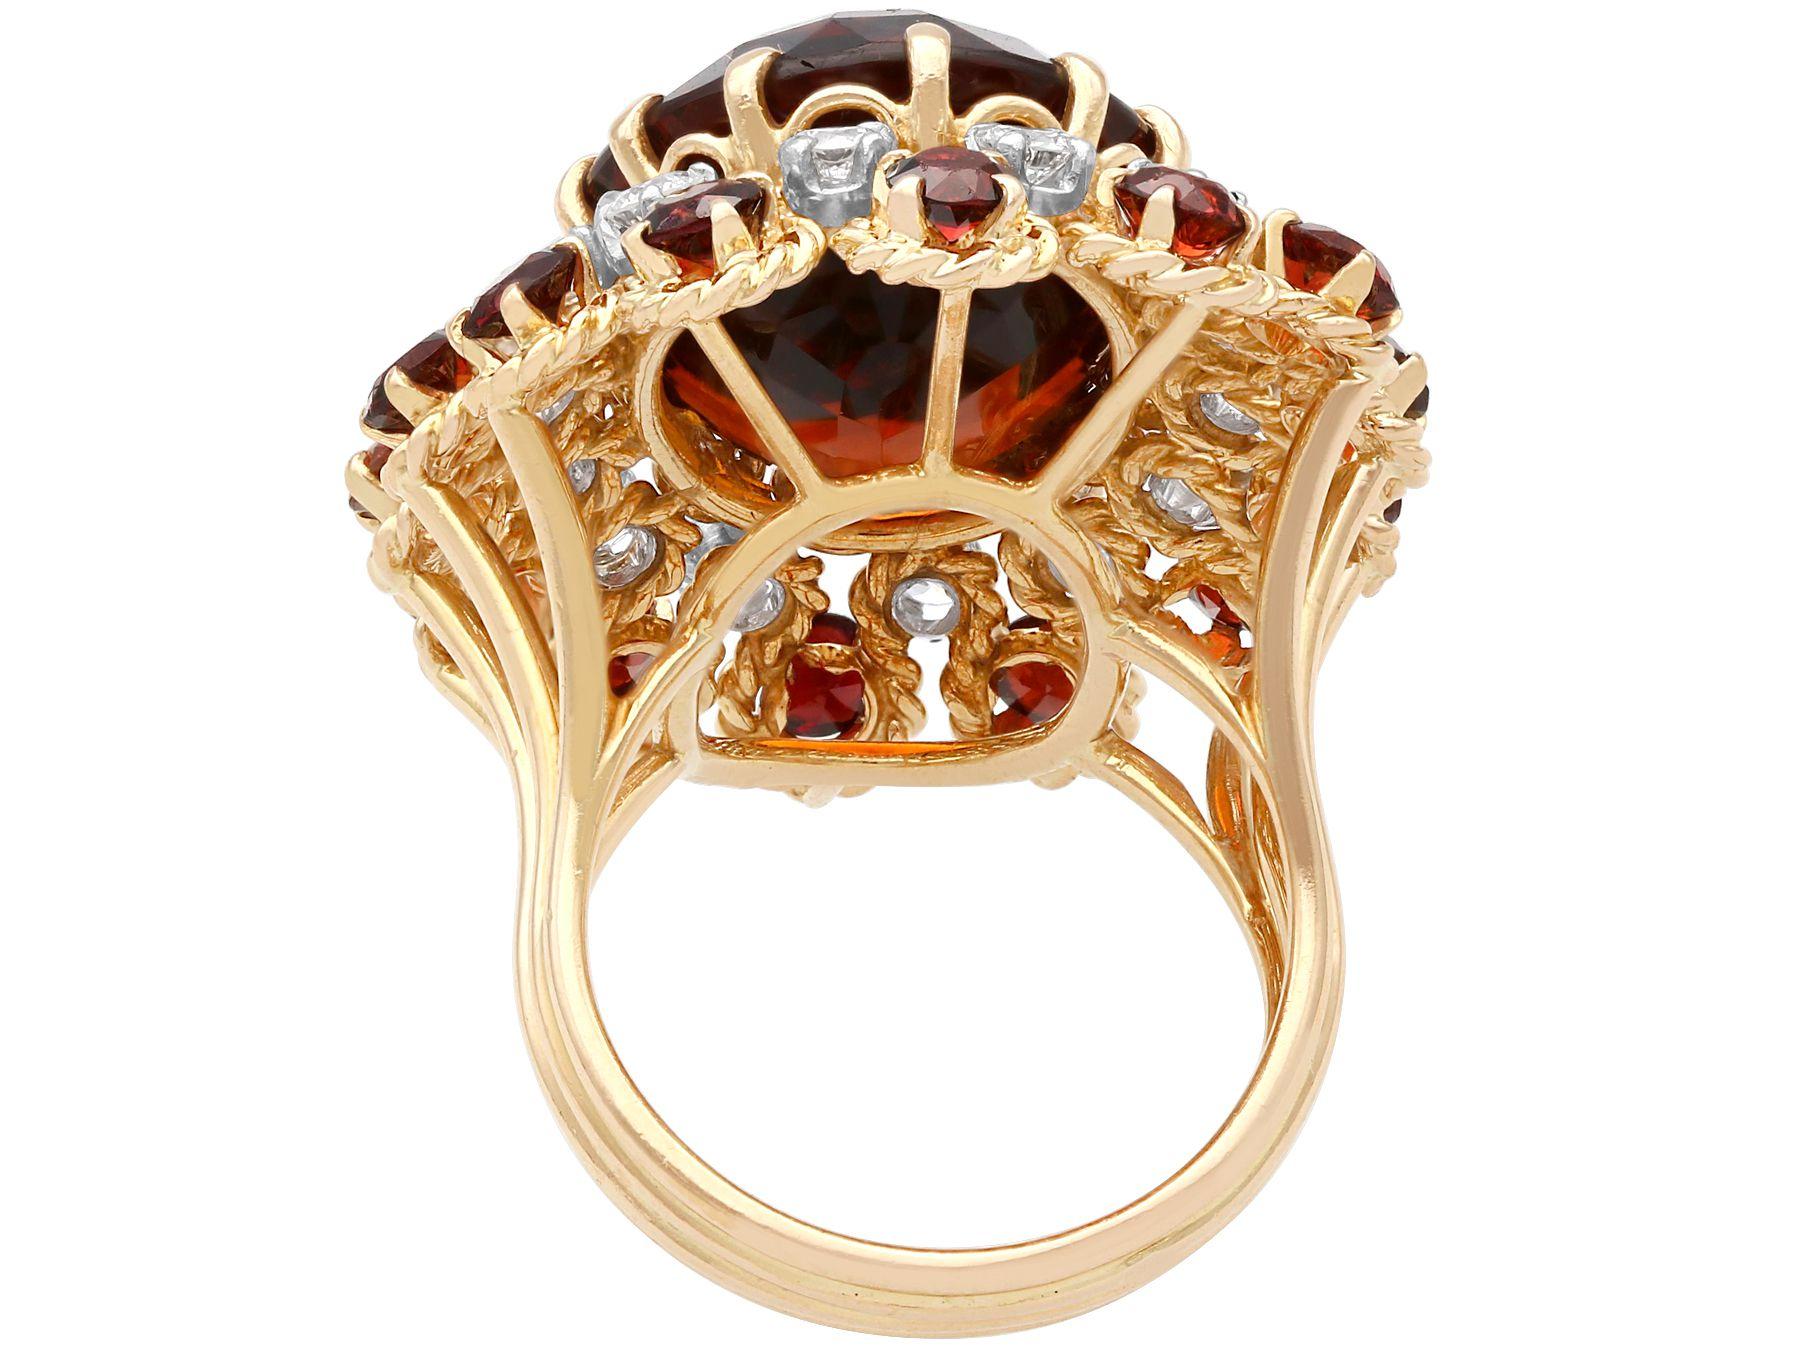 Vintage French 17.67ct Citrine and 1.33ct Diamond Yellow Gold Cocktail Ring In Excellent Condition For Sale In Jesmond, Newcastle Upon Tyne